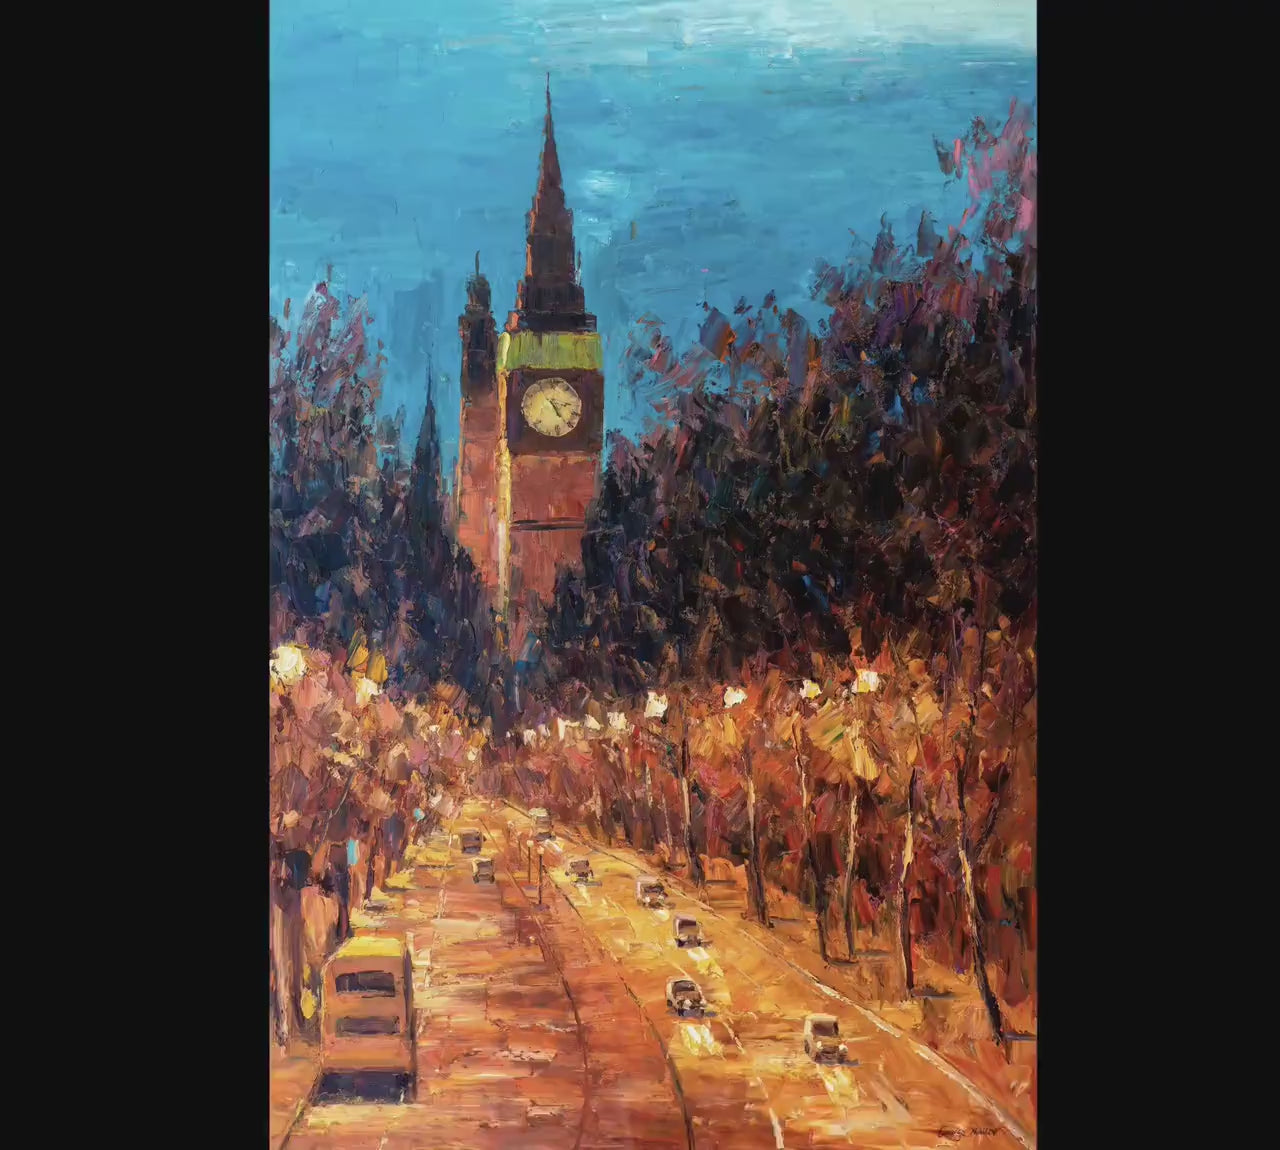 Oil Painting London Tower Street At Night, Hand Painted, Rustic Oil Painting, Original Artwork, Aesthetic Room Decor, Ready To Ship